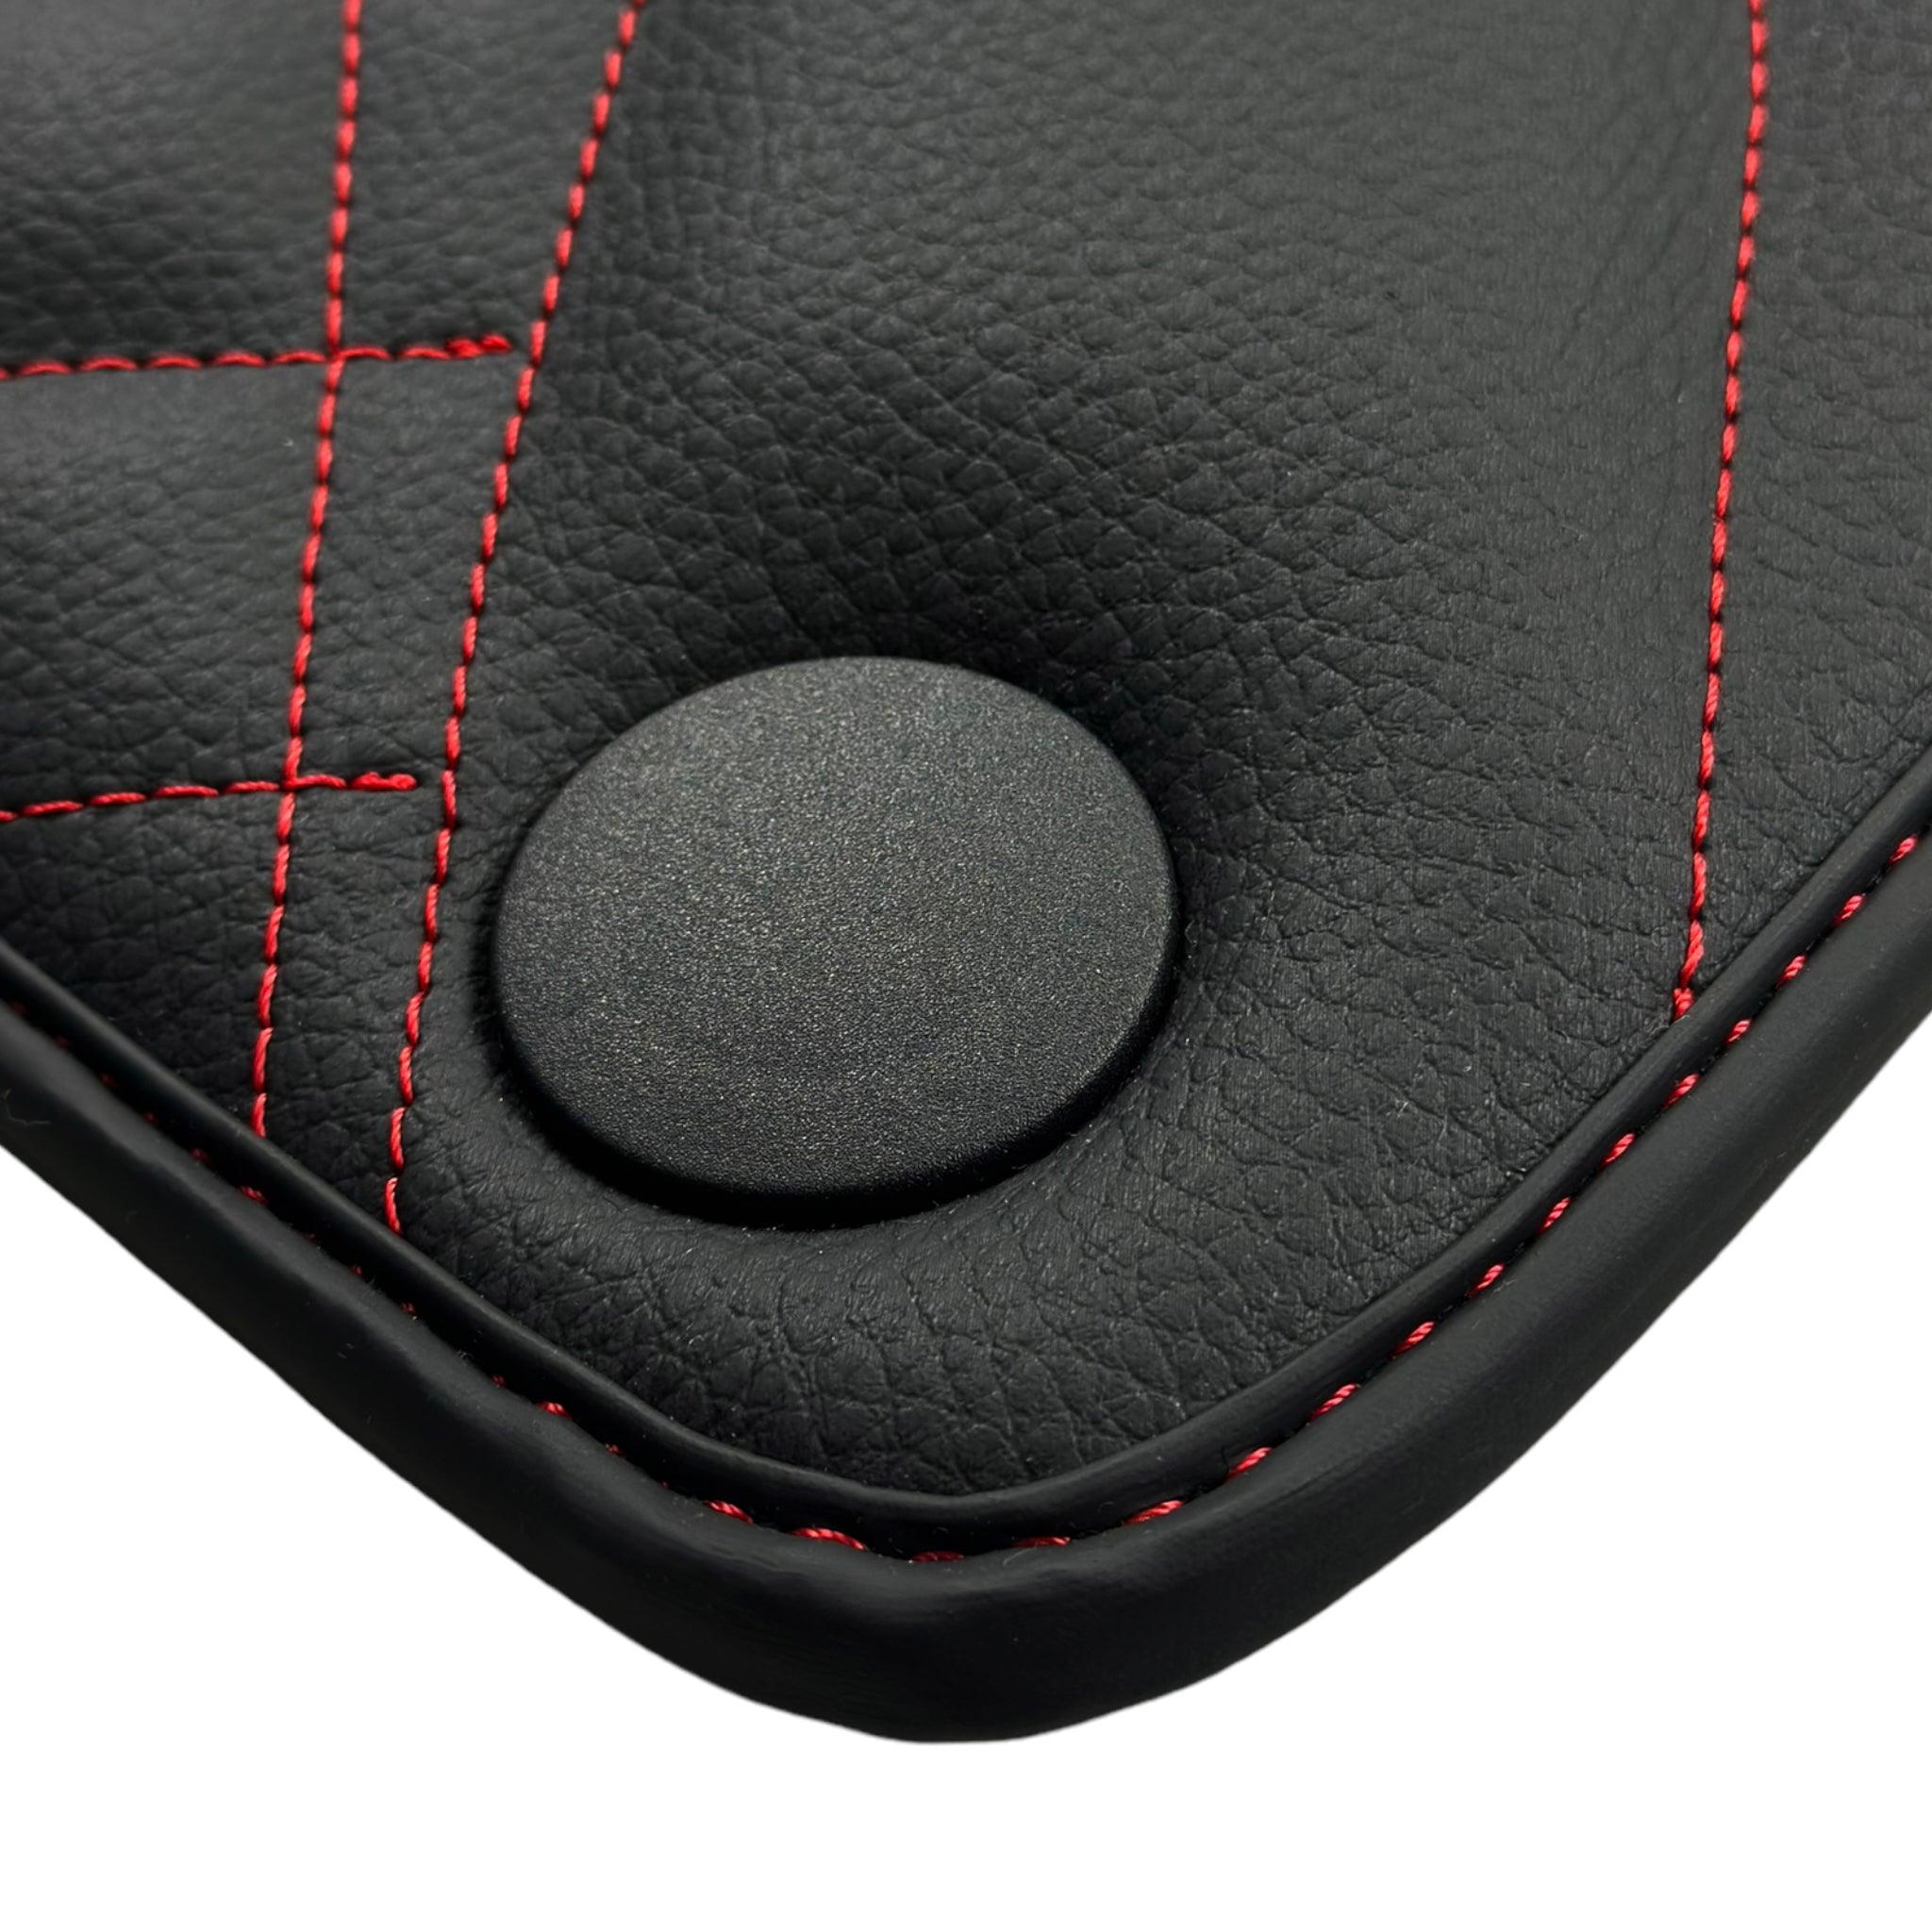 Black Leather Floor Mats For Mercedes Benz S-Class W126 (1979-1991)